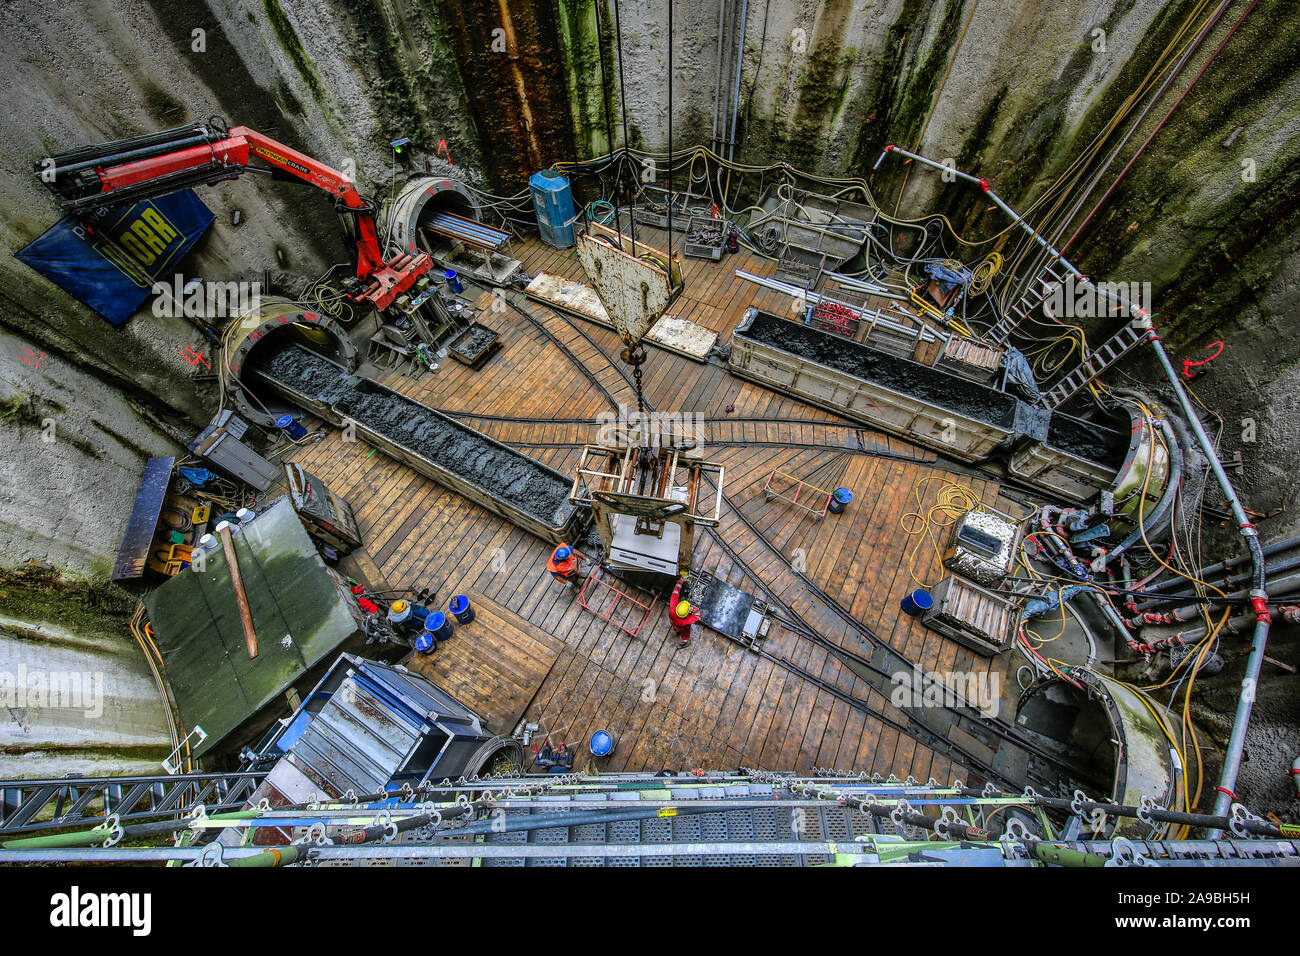 16.06.2016, Oberhausen, North Rhine-Westphalia, Germany - Emscher conversion, new construction of the Emscher sewer AKE, tuebbing tunneling at shaft 2 Stock Photo